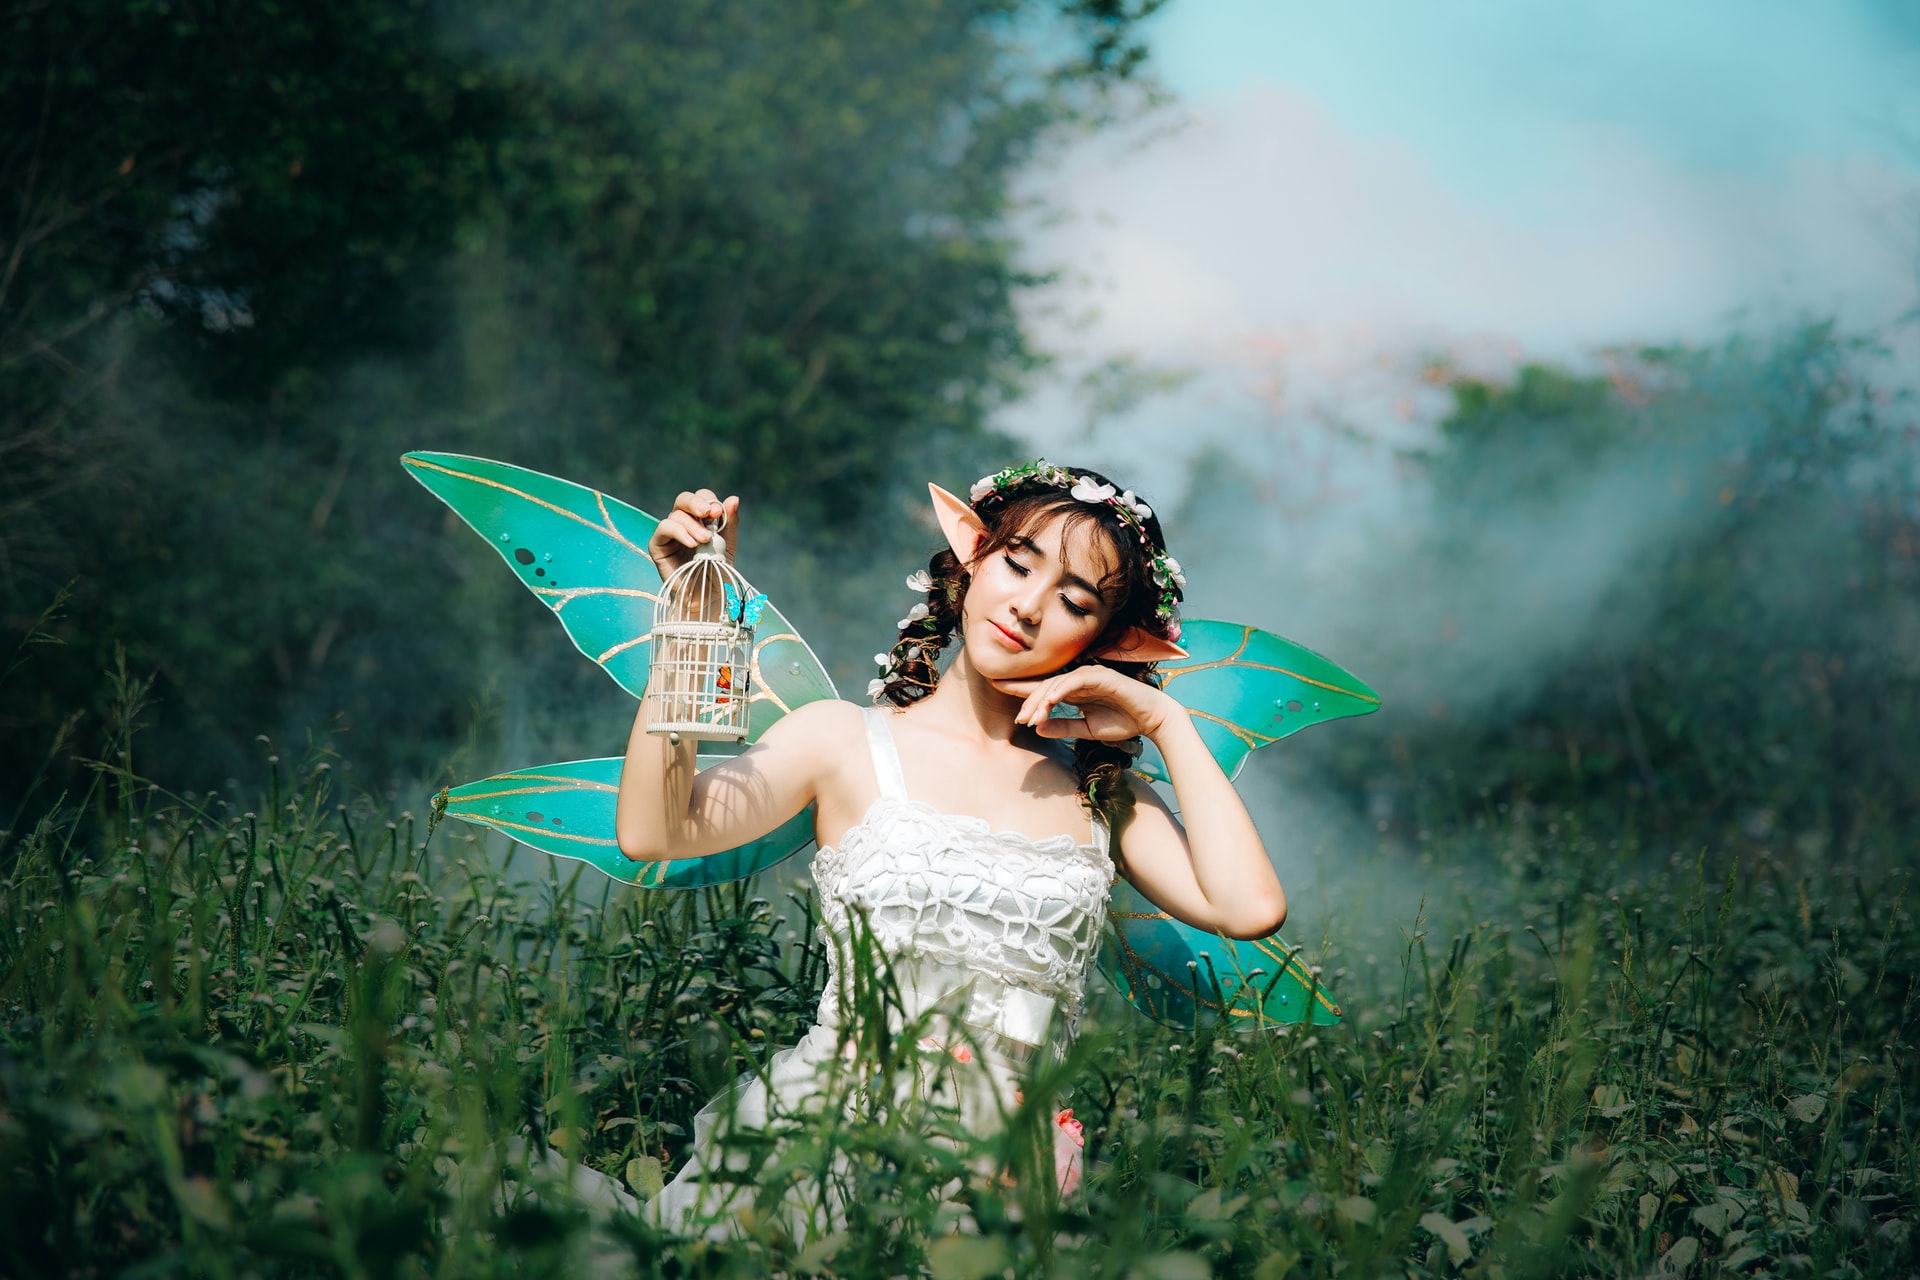 Girl With Green Wings In Grassy Field